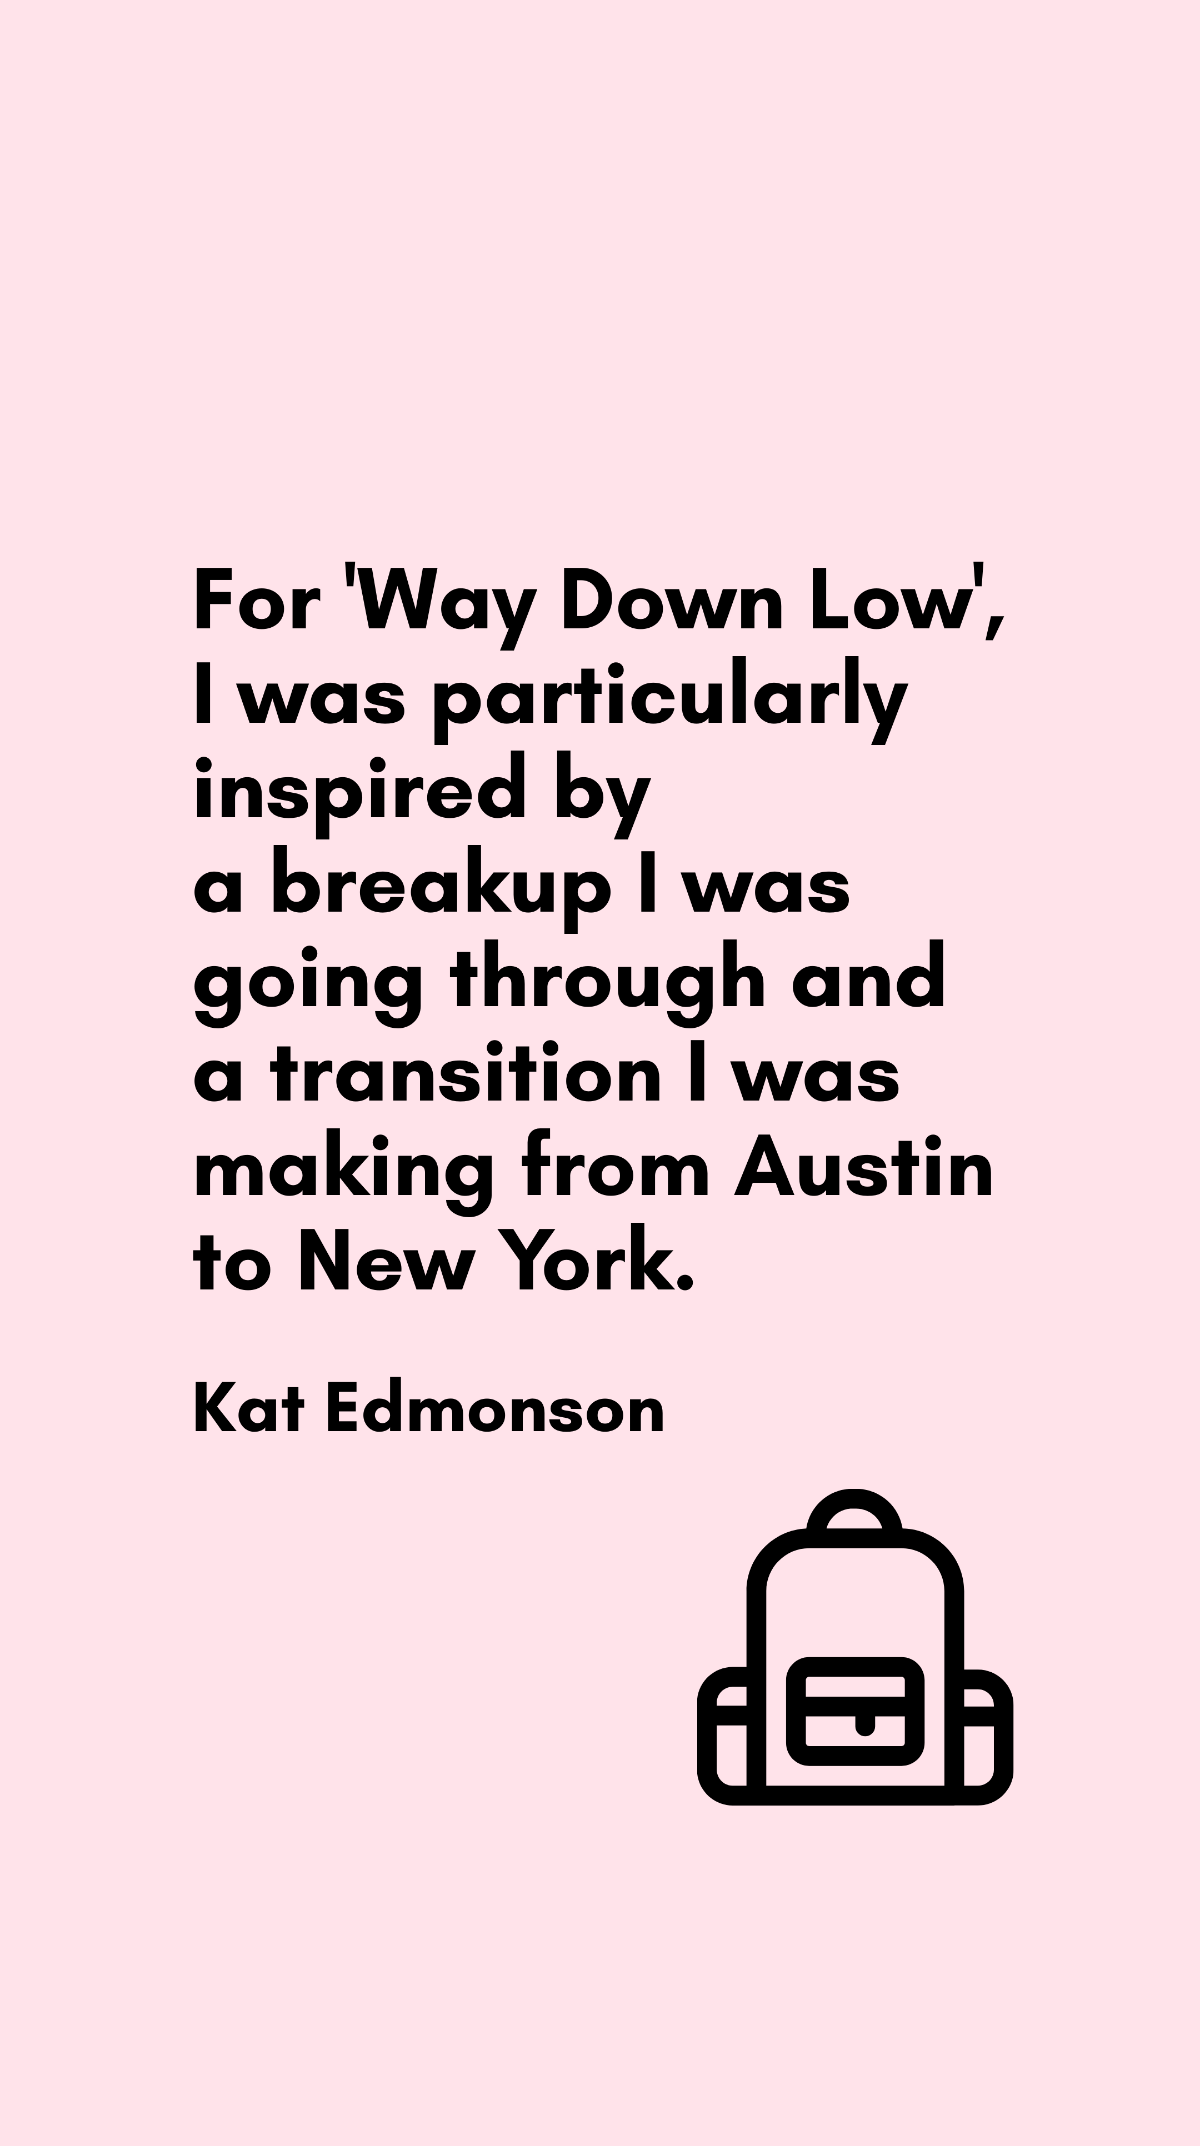 Free Kat Edmonson - For 'Way Down Low', I was particularly inspired by a breakup I was going through and a transition I was making from Austin to New York. Template